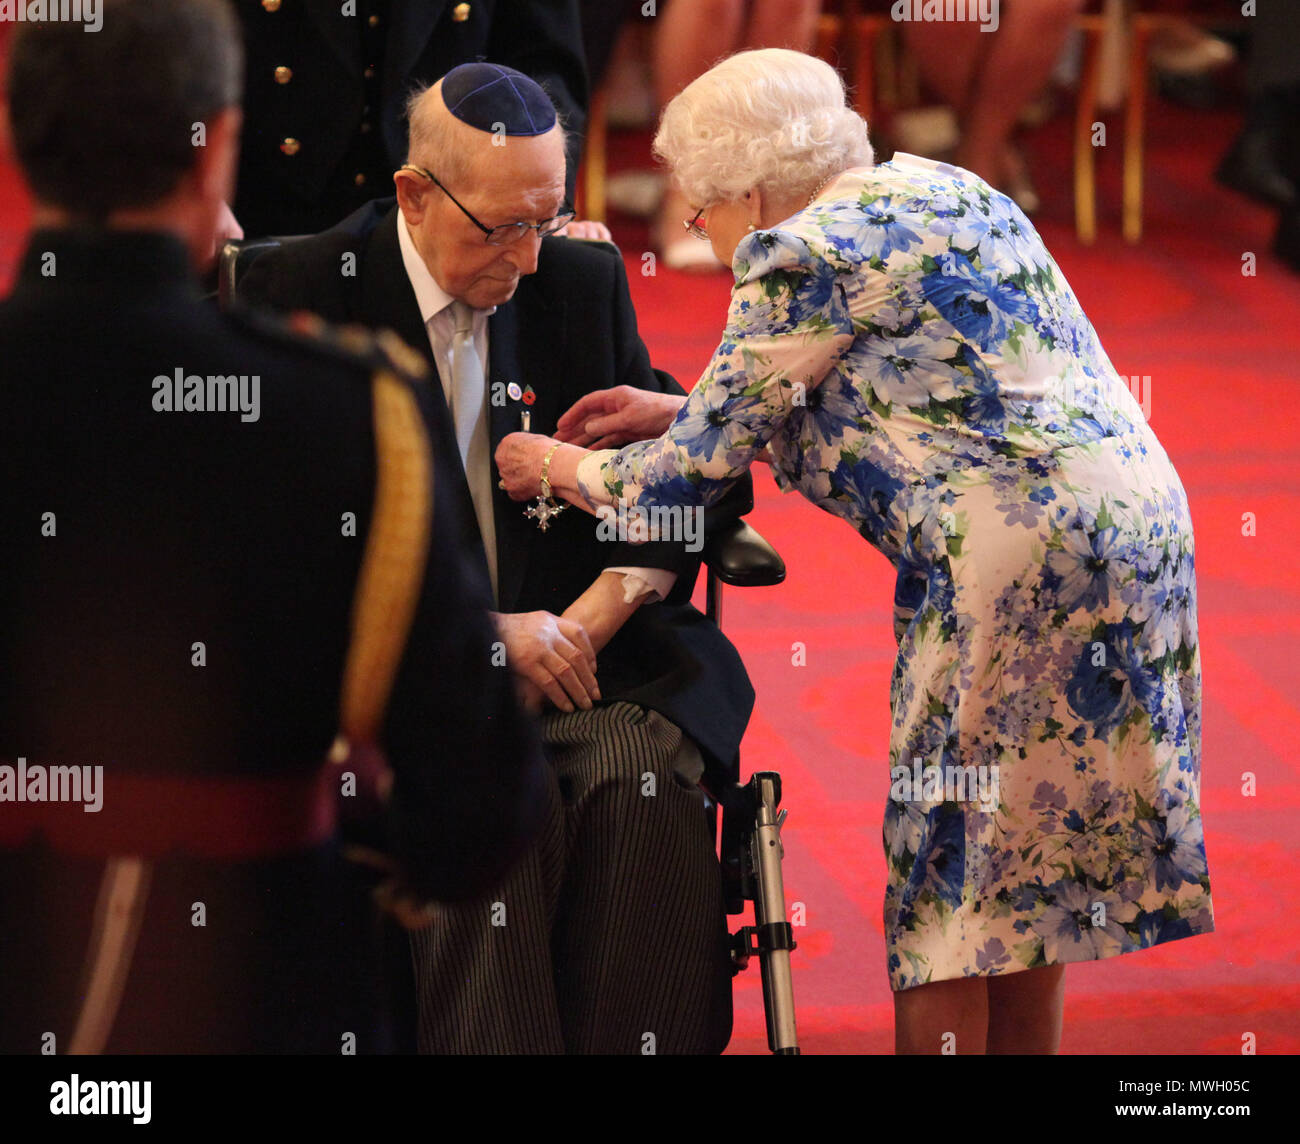 Lieutenant Colonel Mordaunt Cohen, 101, is made an MBE (Member of the Order of the British Empire) by Queen Elizabeth II for services to Second World War education during an Investiture ceremony at Buckingham Palace in central London. Stock Photo